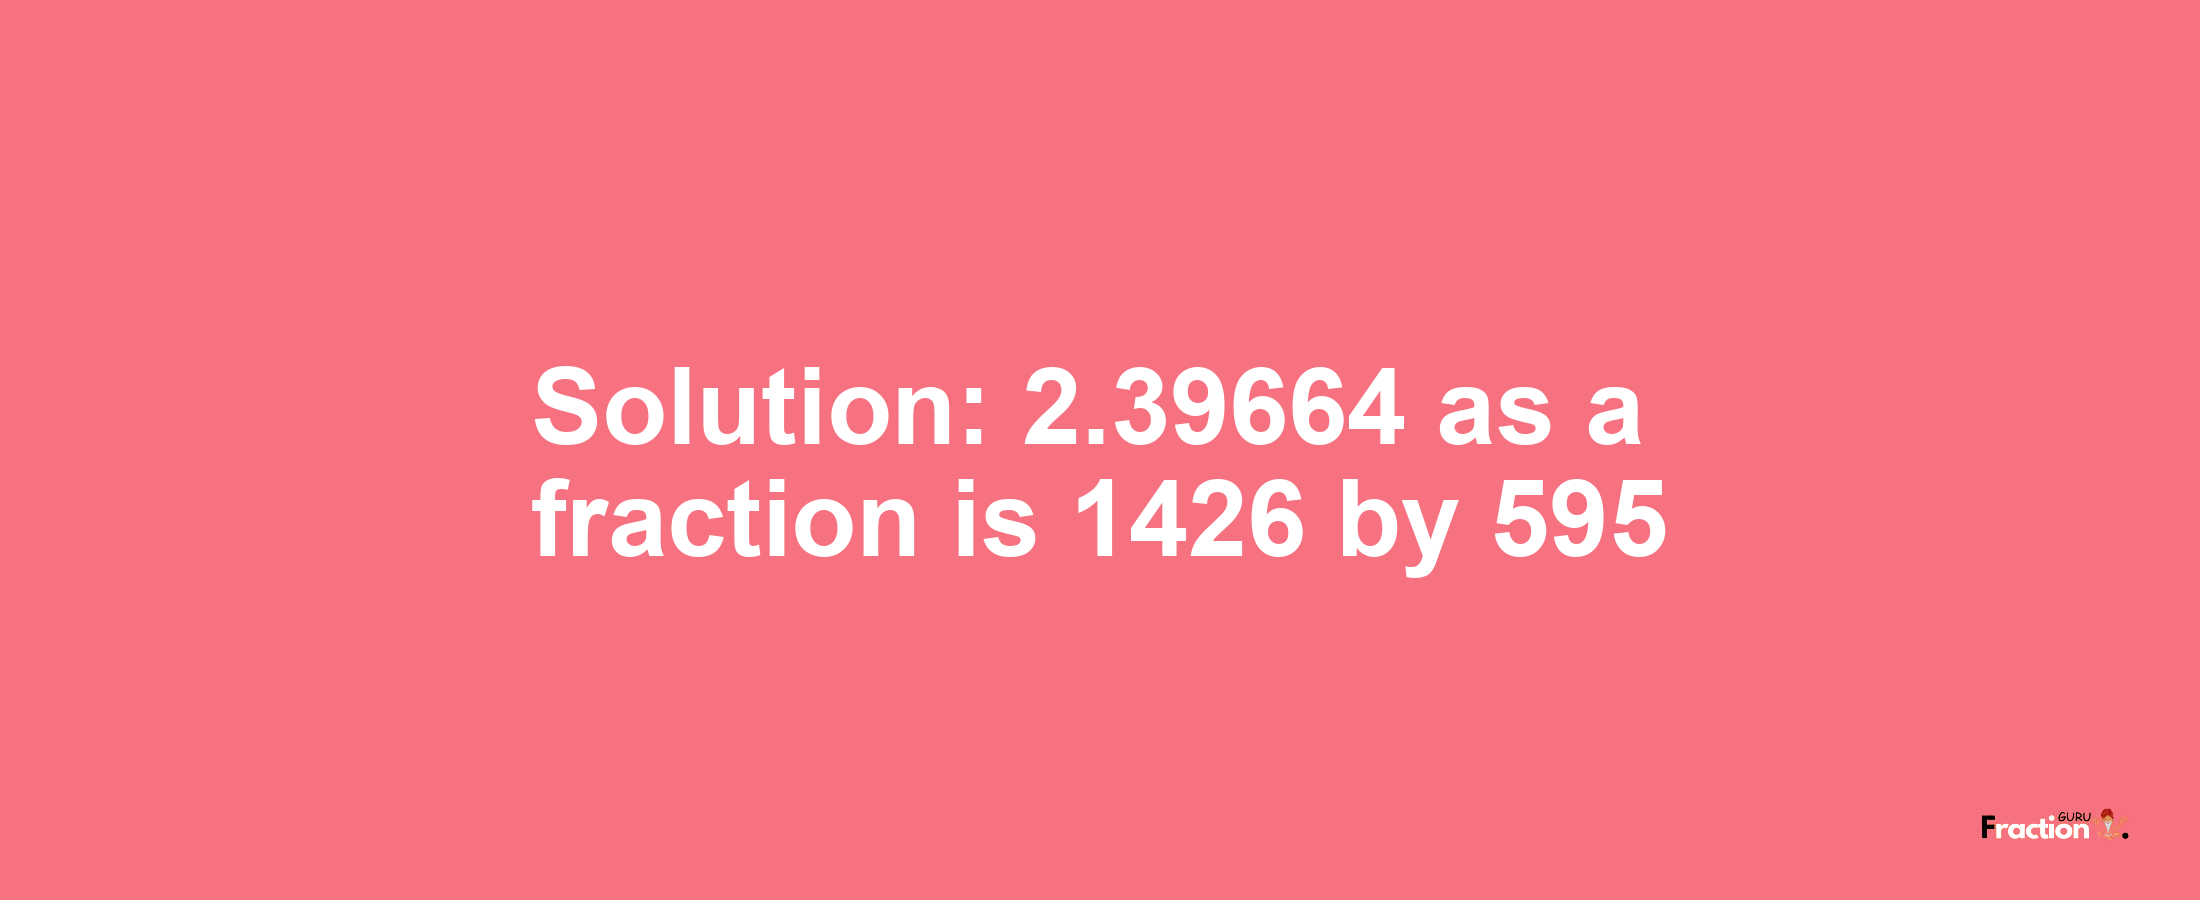 Solution:2.39664 as a fraction is 1426/595